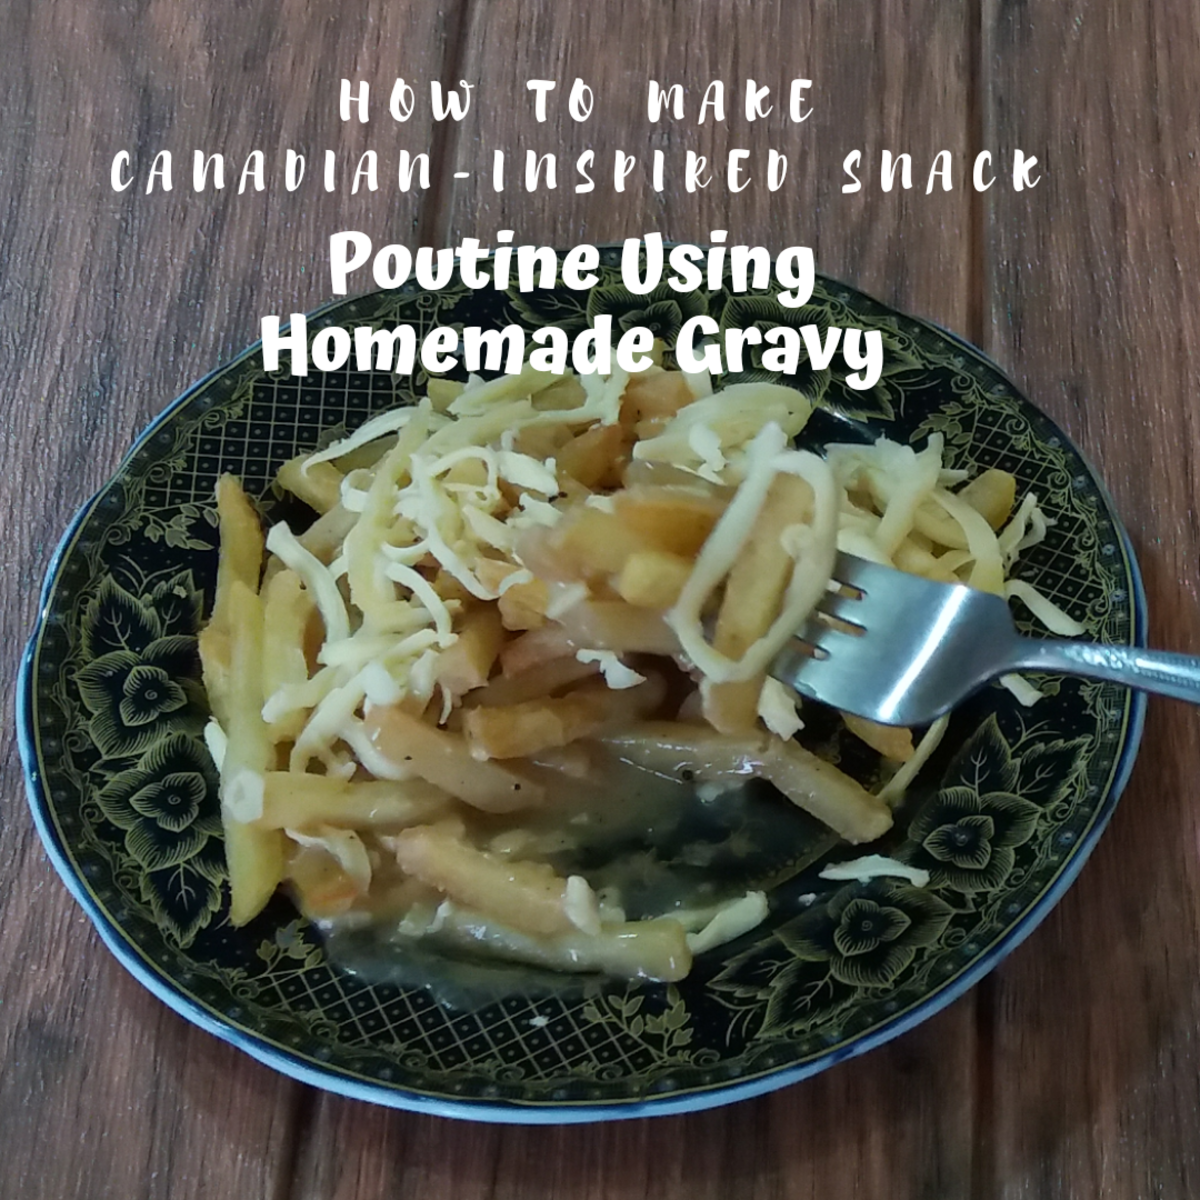 How to make poutine with homemade gravy, a Canadian-inspired snack.